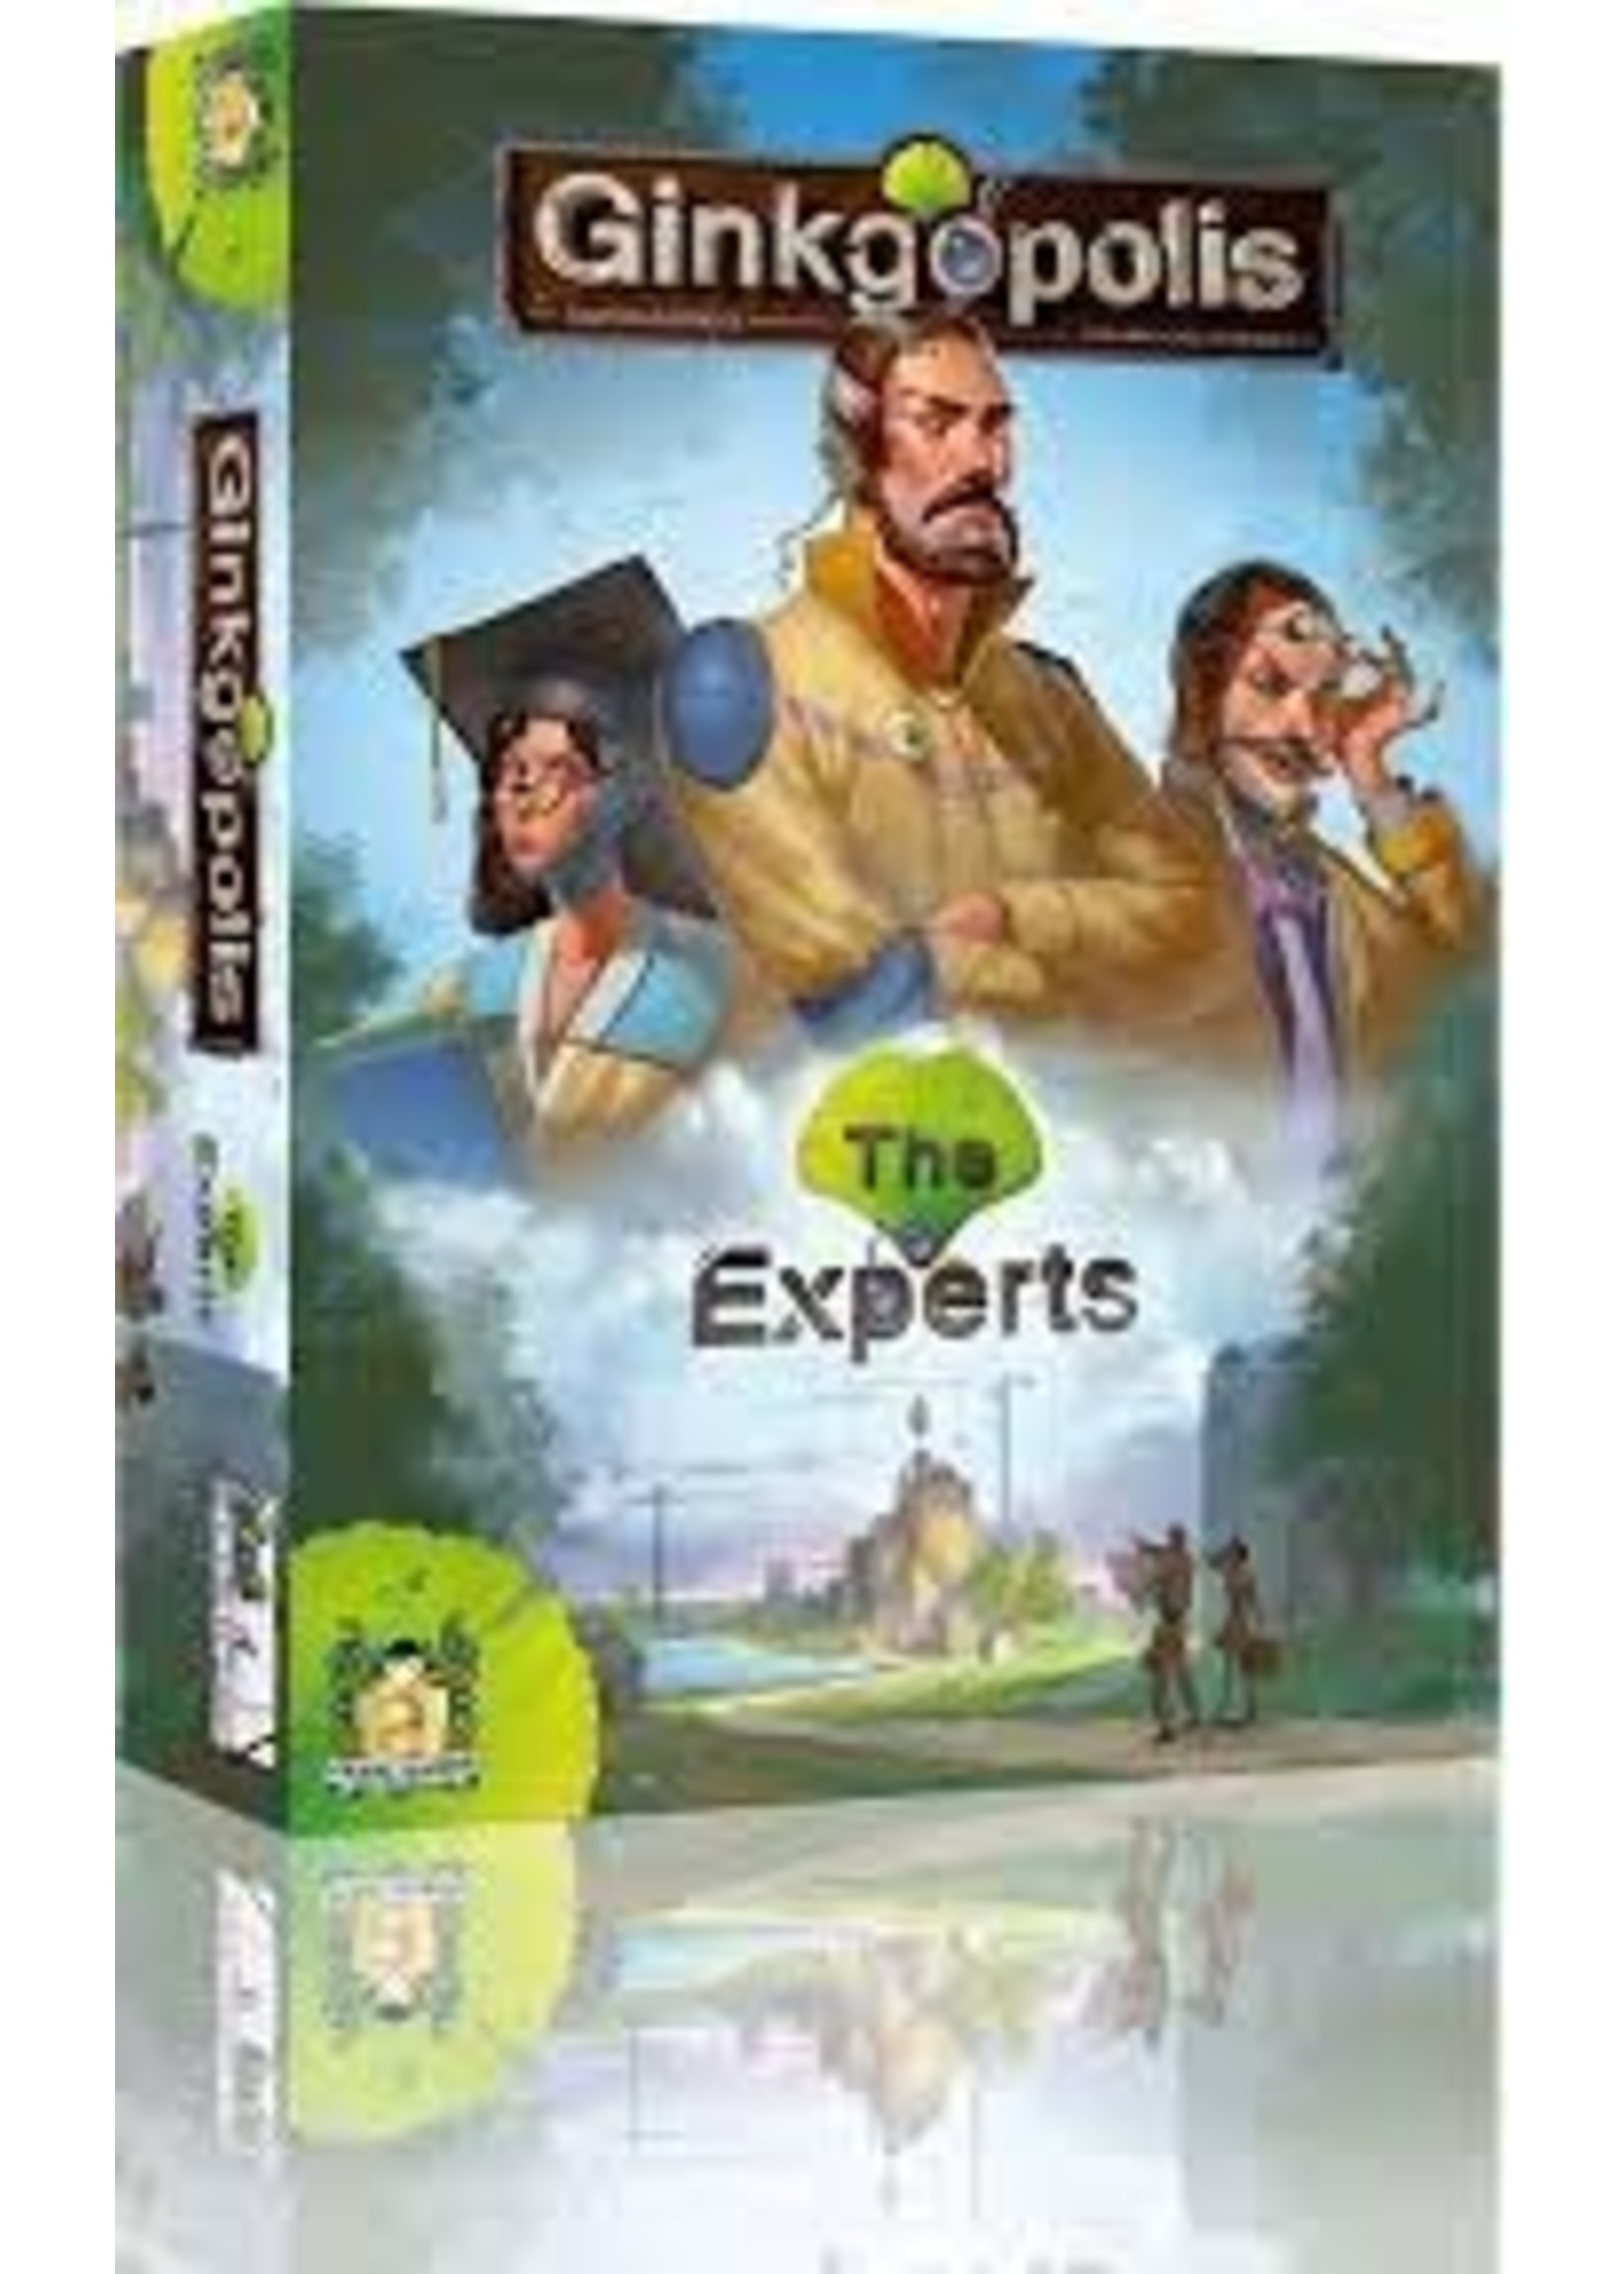 Pearl Games Ginkgopolis: The Experts